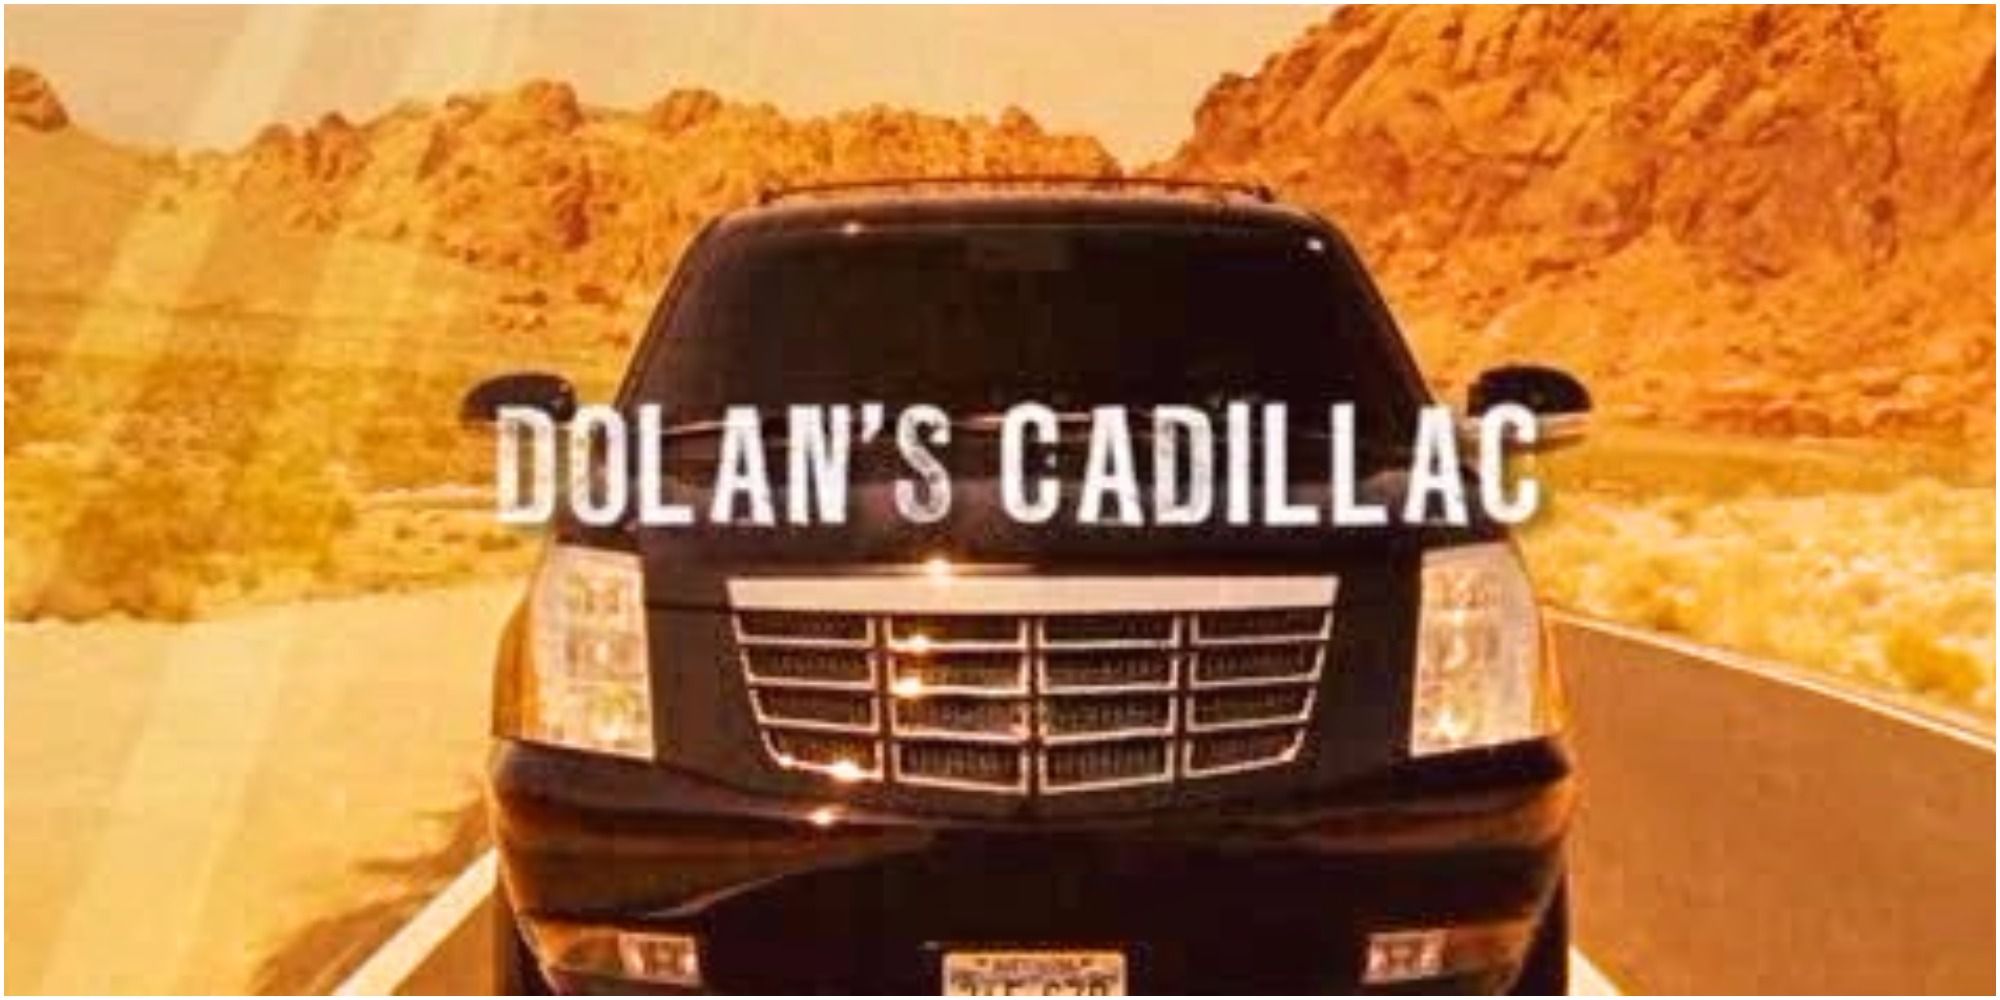 The title card for Dolan's Cadillac 